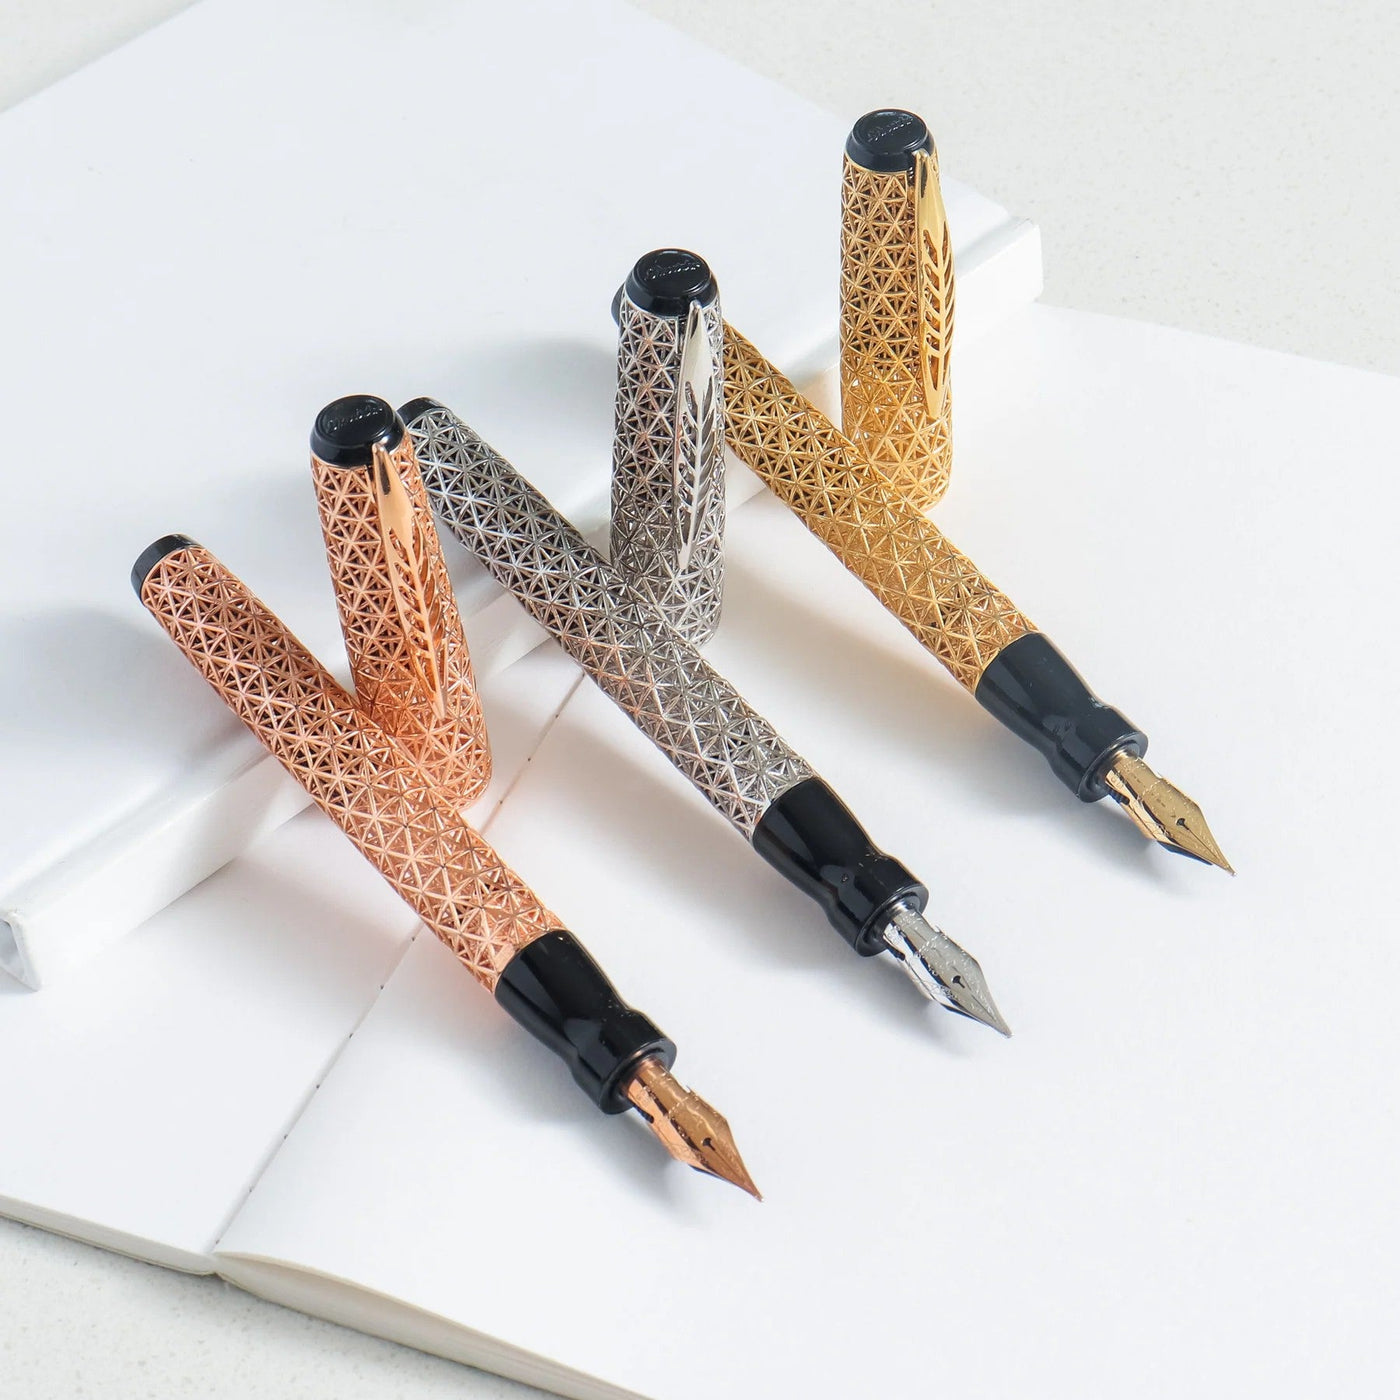 One of the slimmest - and most stylish - pens in the world